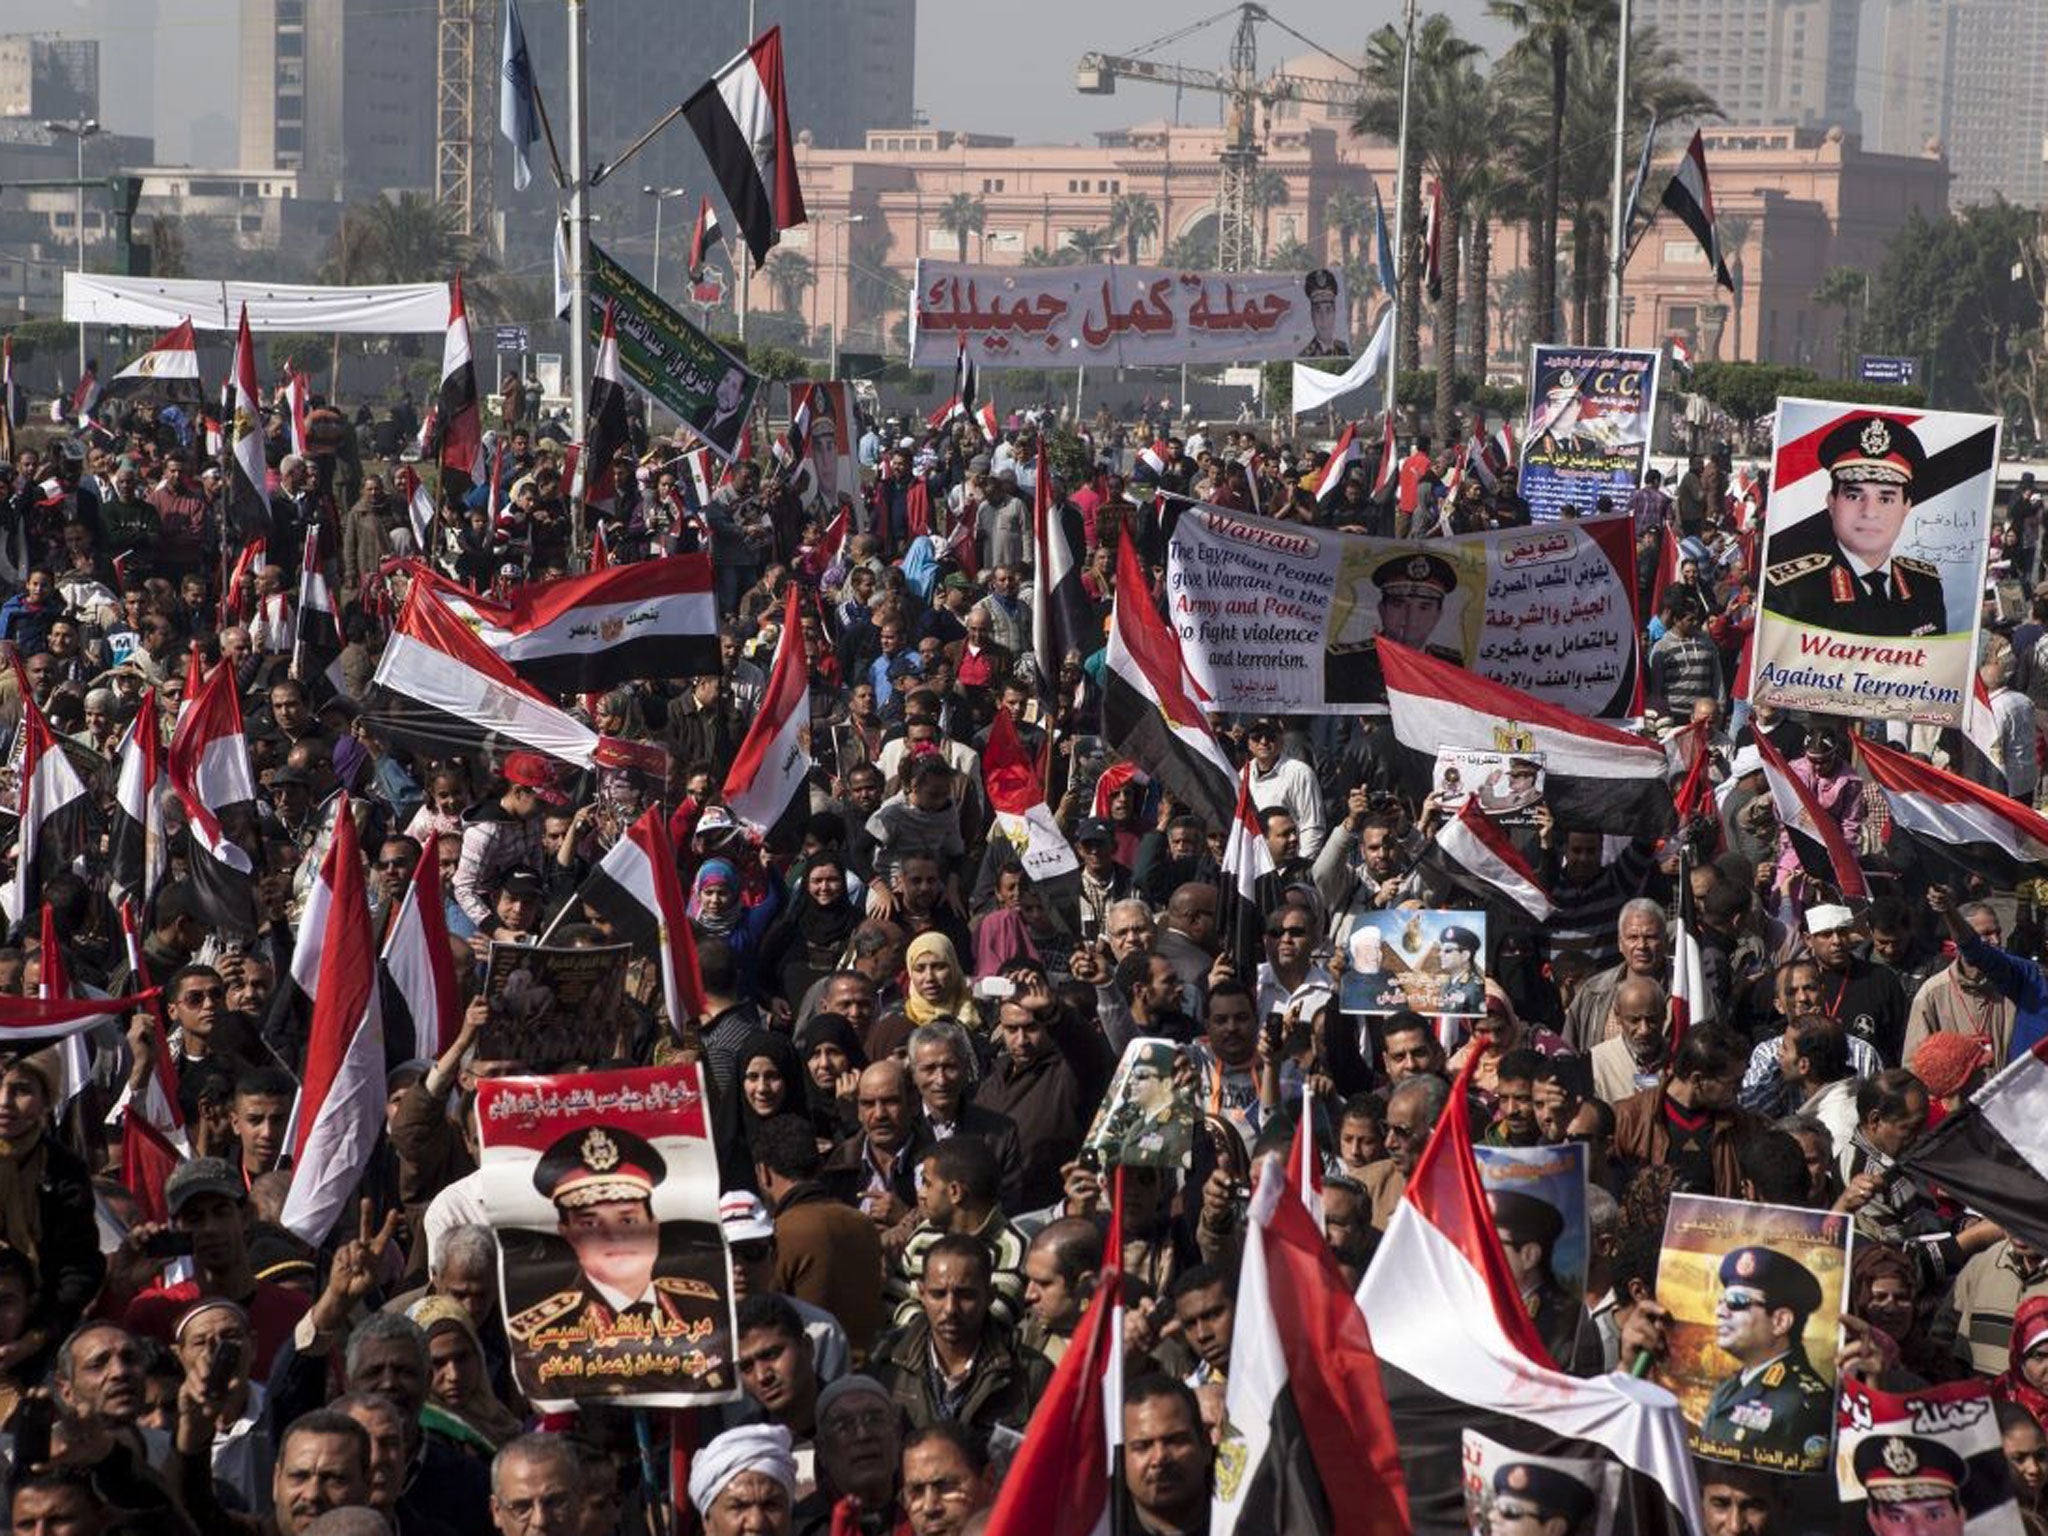 Supporters of Egyptian Defense Minister General Abdel Fattah al-Sisi gather in Tahrir Square to celebrate the third anniversary of Egypt's 2011 uprising on January 25, 2014 in Cairo, Egypt.